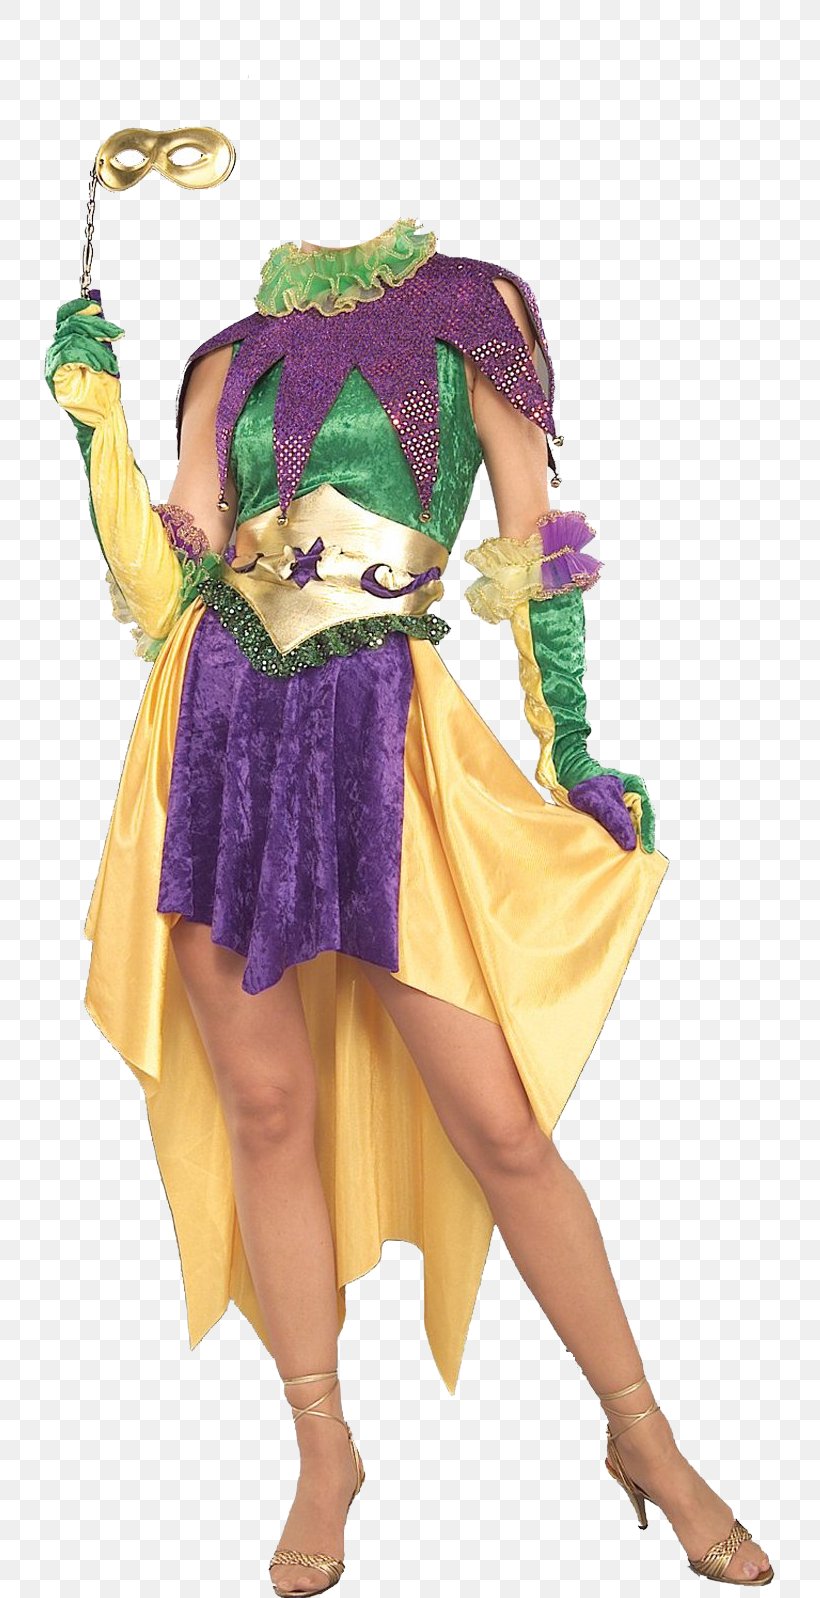 Mardi Gras In New Orleans Costume Party Dress, PNG, 731x1598px, Mardi Gras In New Orleans, Clothing, Costume, Costume Design, Costume Party Download Free